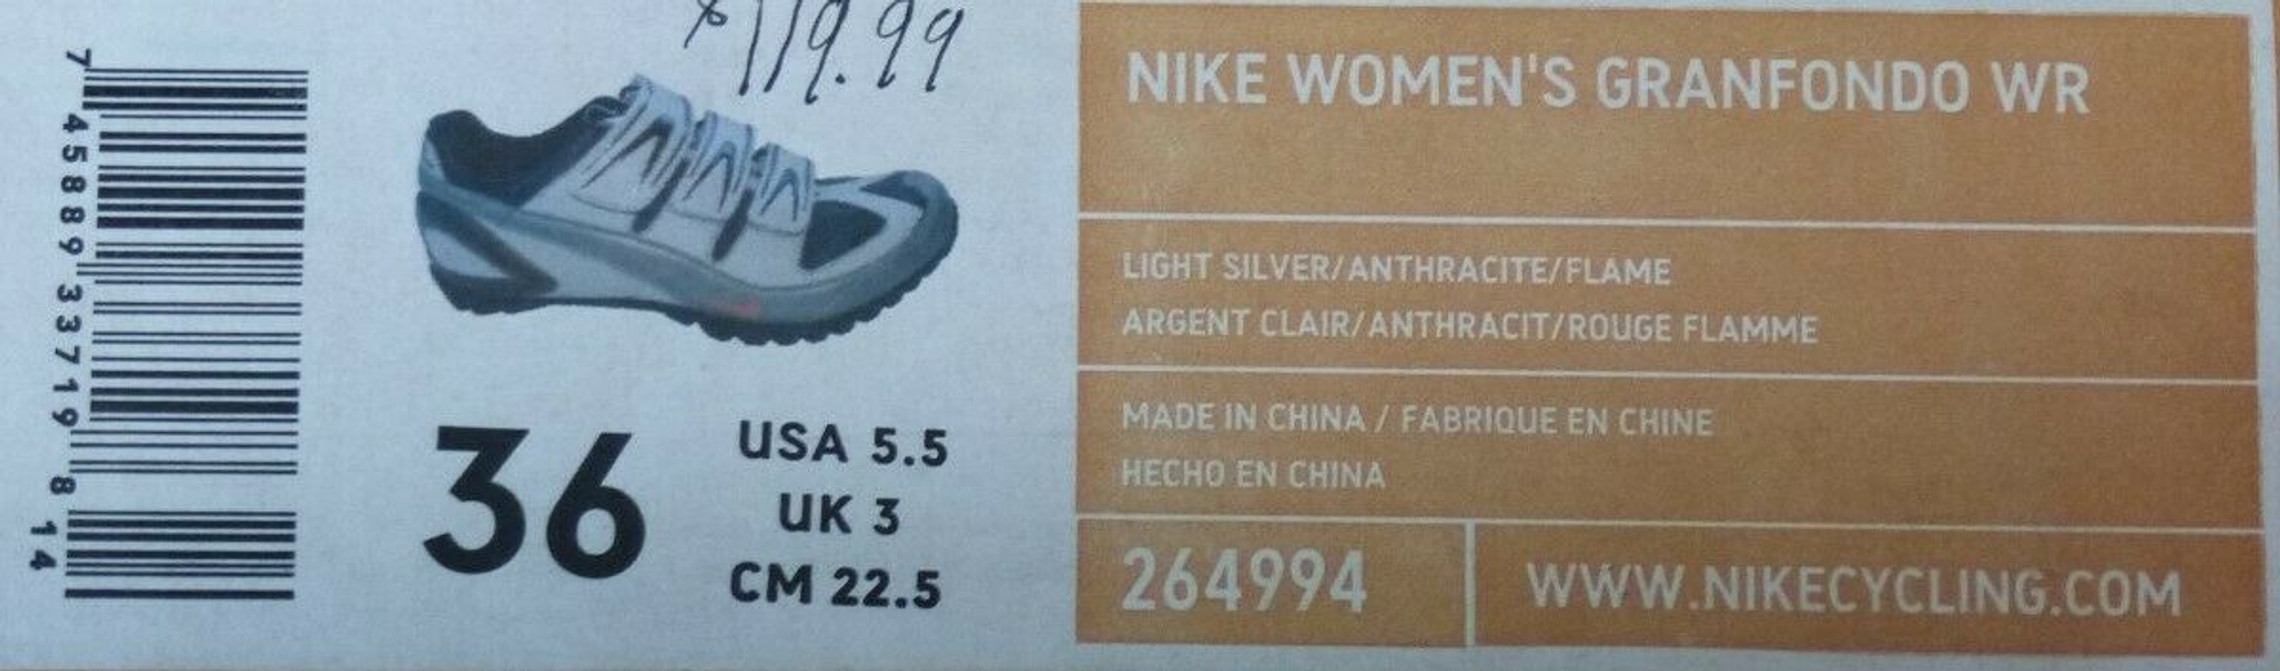 Nike Granfondo WR Women's Road Cycling / Spin Shoes: Size 37 - Two Bolt Cleats - Walkable - Grey/Black (NEW w/stains)